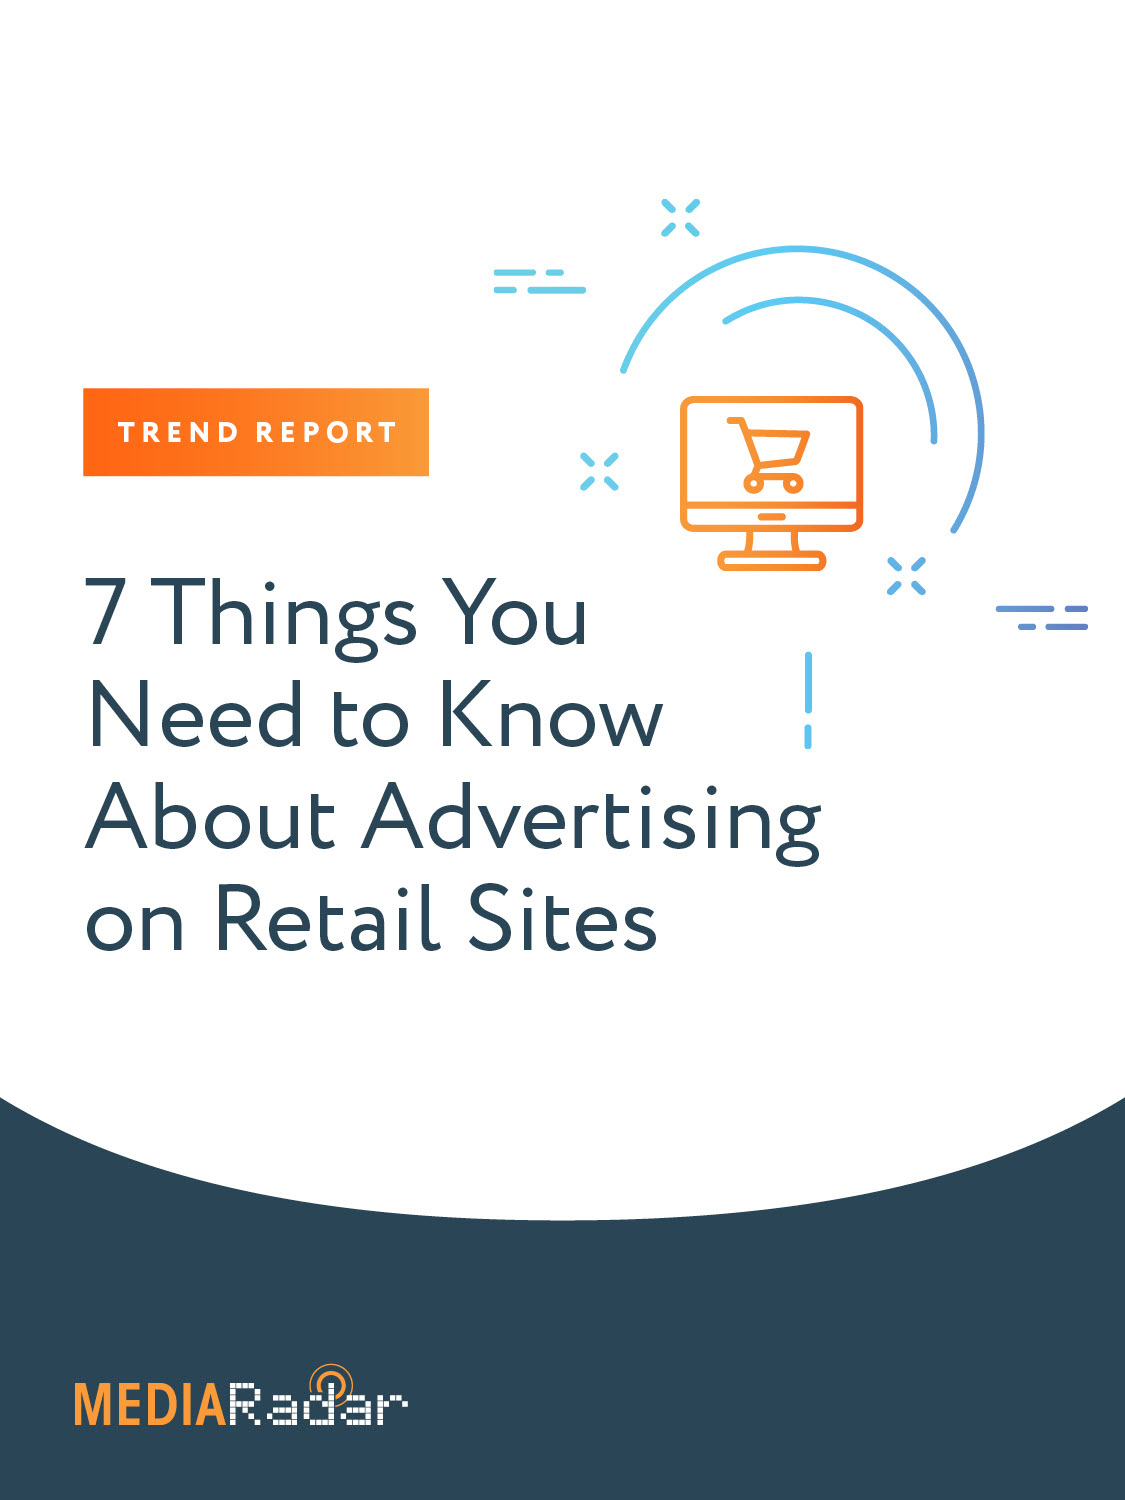 7 Things You Need To Know About Advertising on Retail Sites